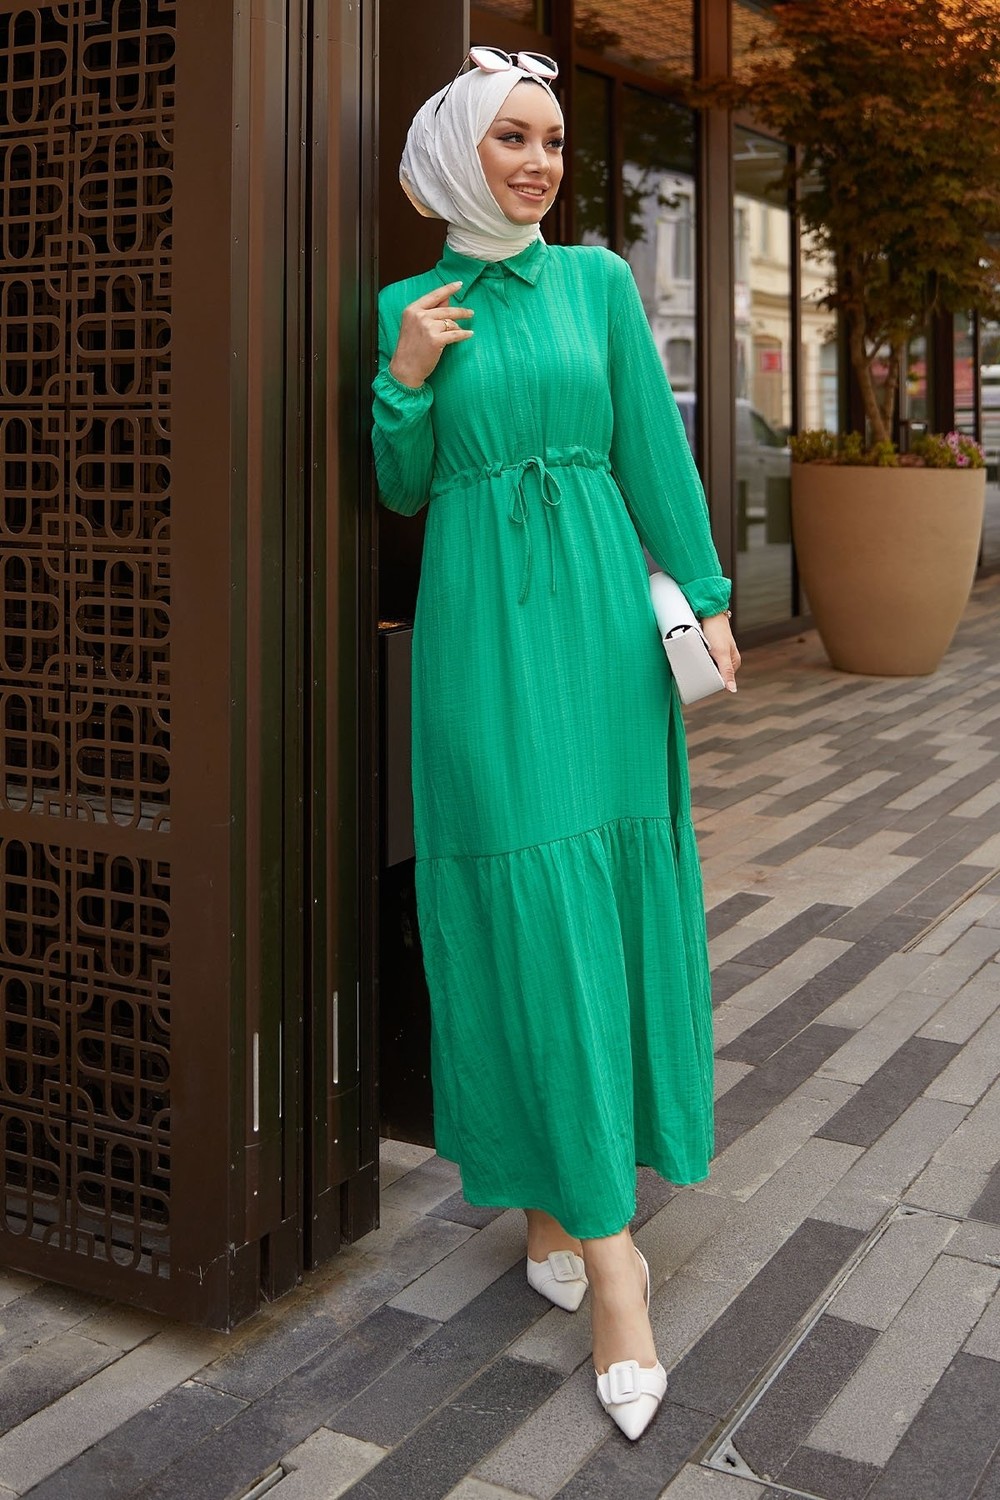 InStyle Aliza Tunnel Dress With Belt - Green